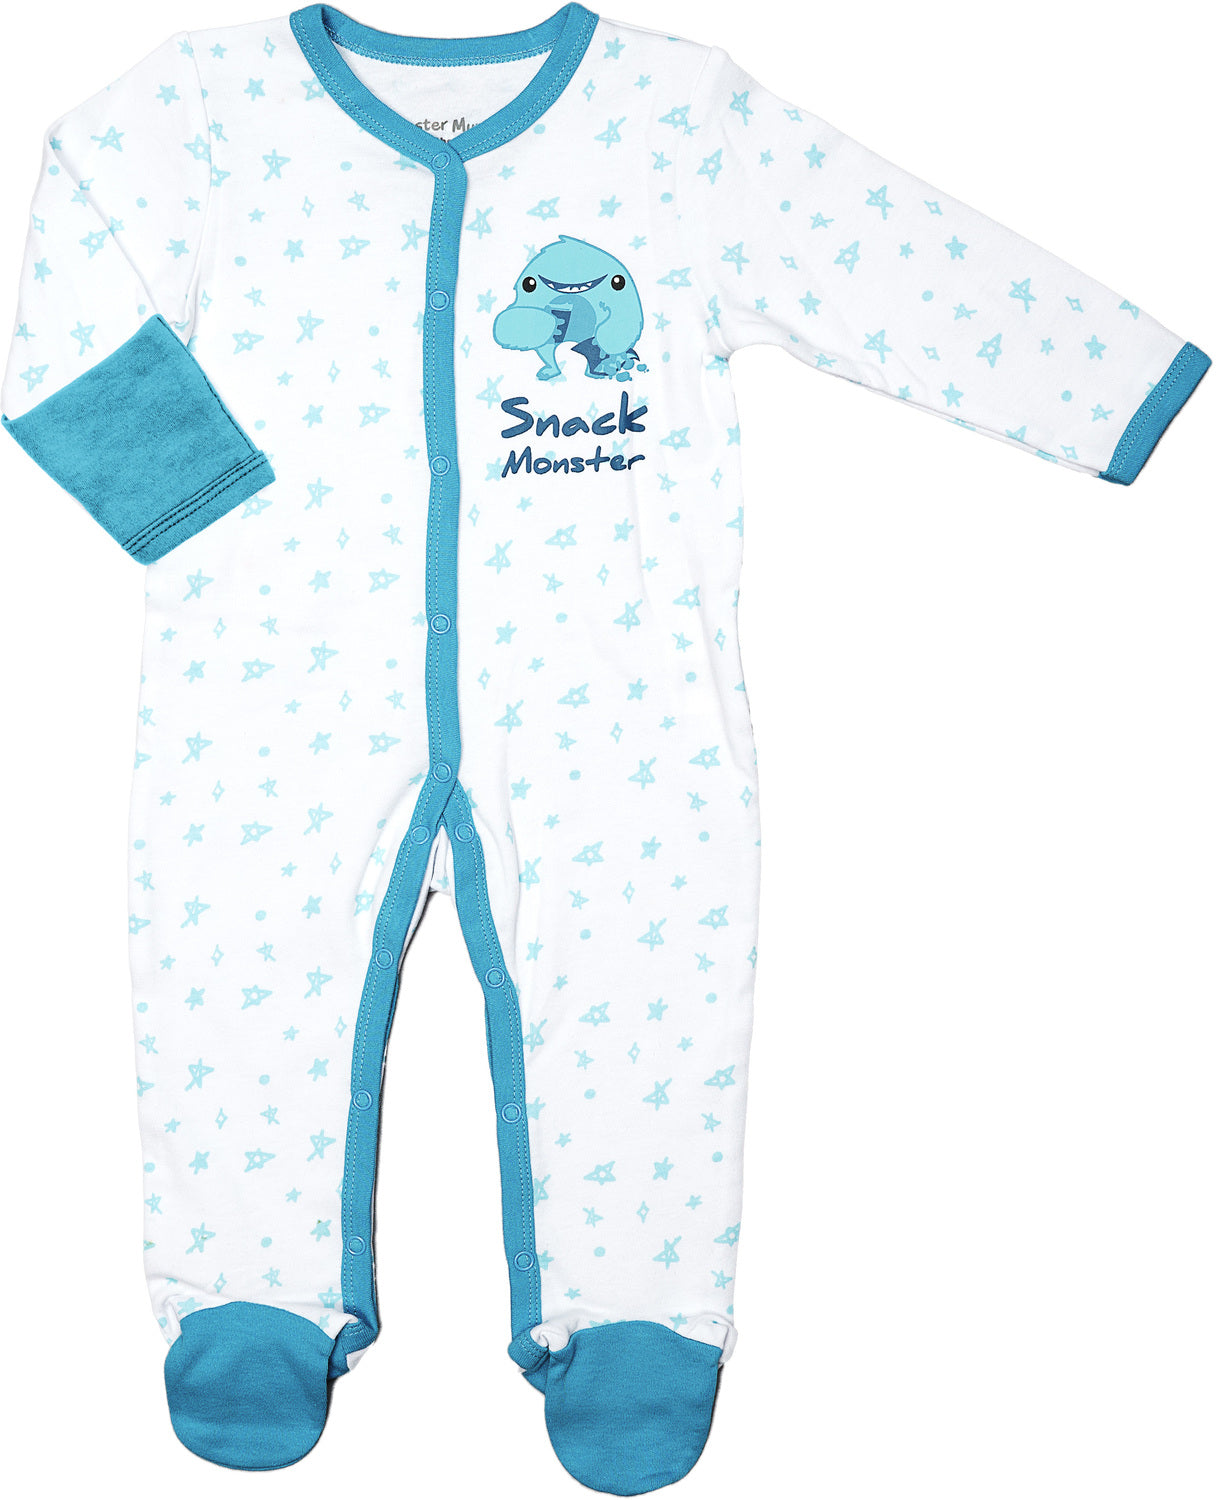 Snack Monster Pajamas by Monster Munchkins